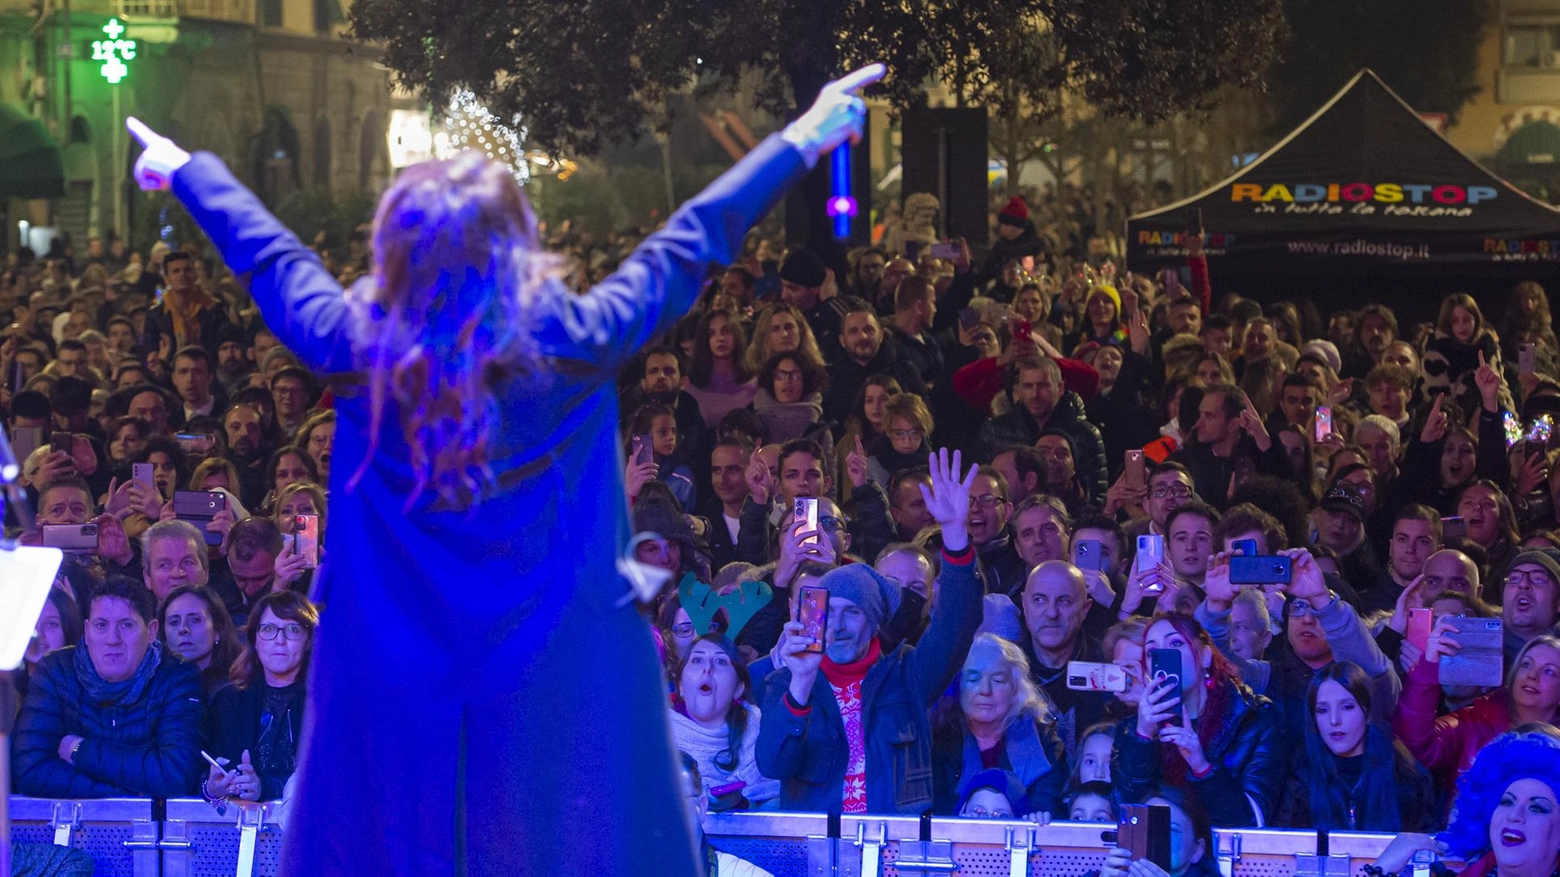 Torna il San Silvestro in piazza ‘Count Down Party’ a Radio Stop